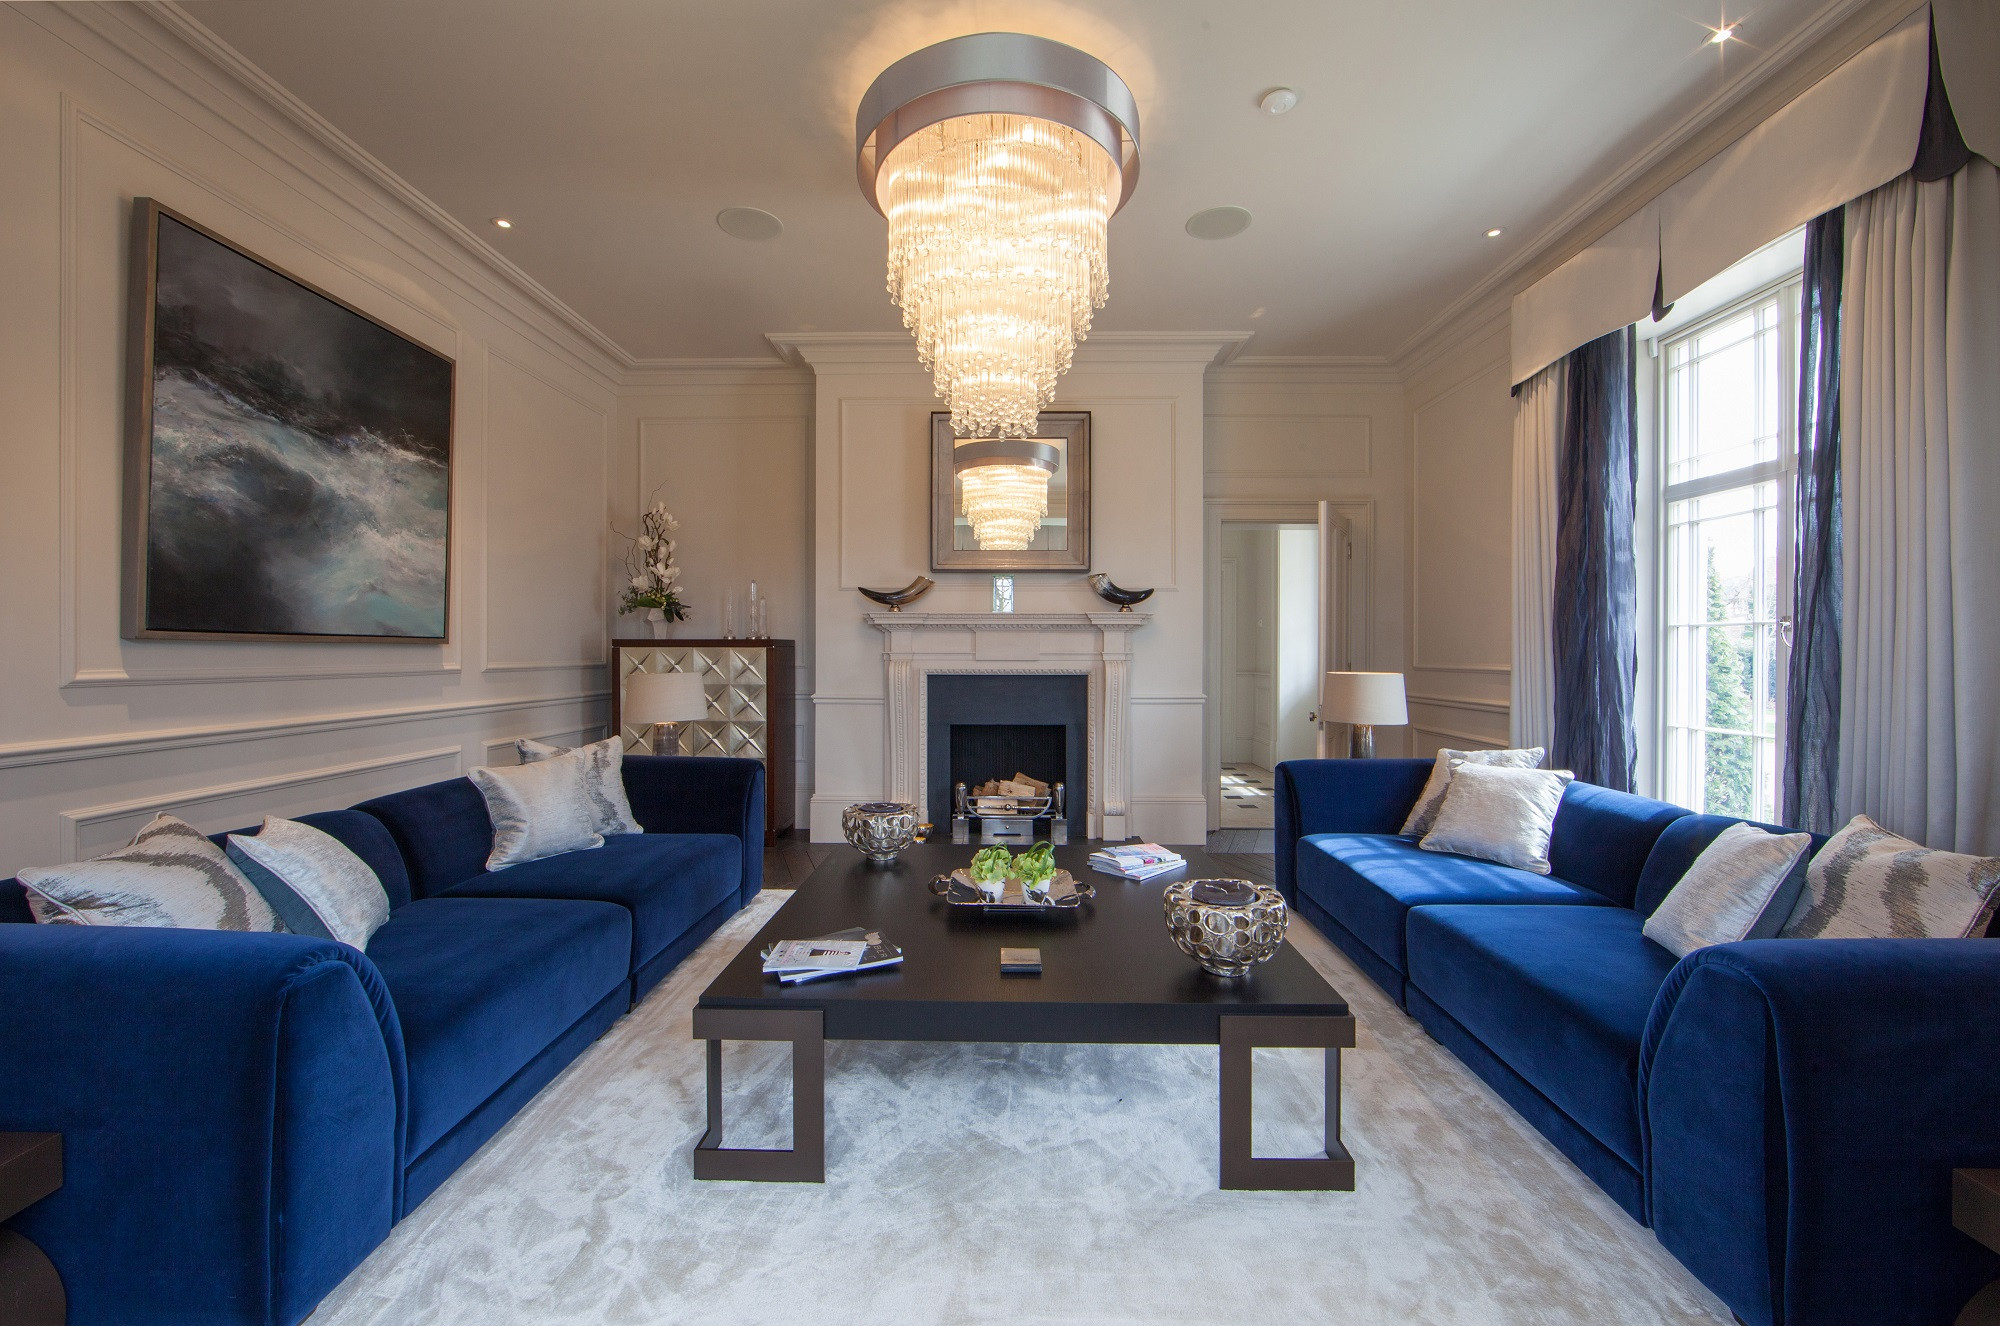 Formal sitting room with blue sofas and pale walls - Contemporary - Living  Room - Cheshire - by UBER Interiors | Houzz